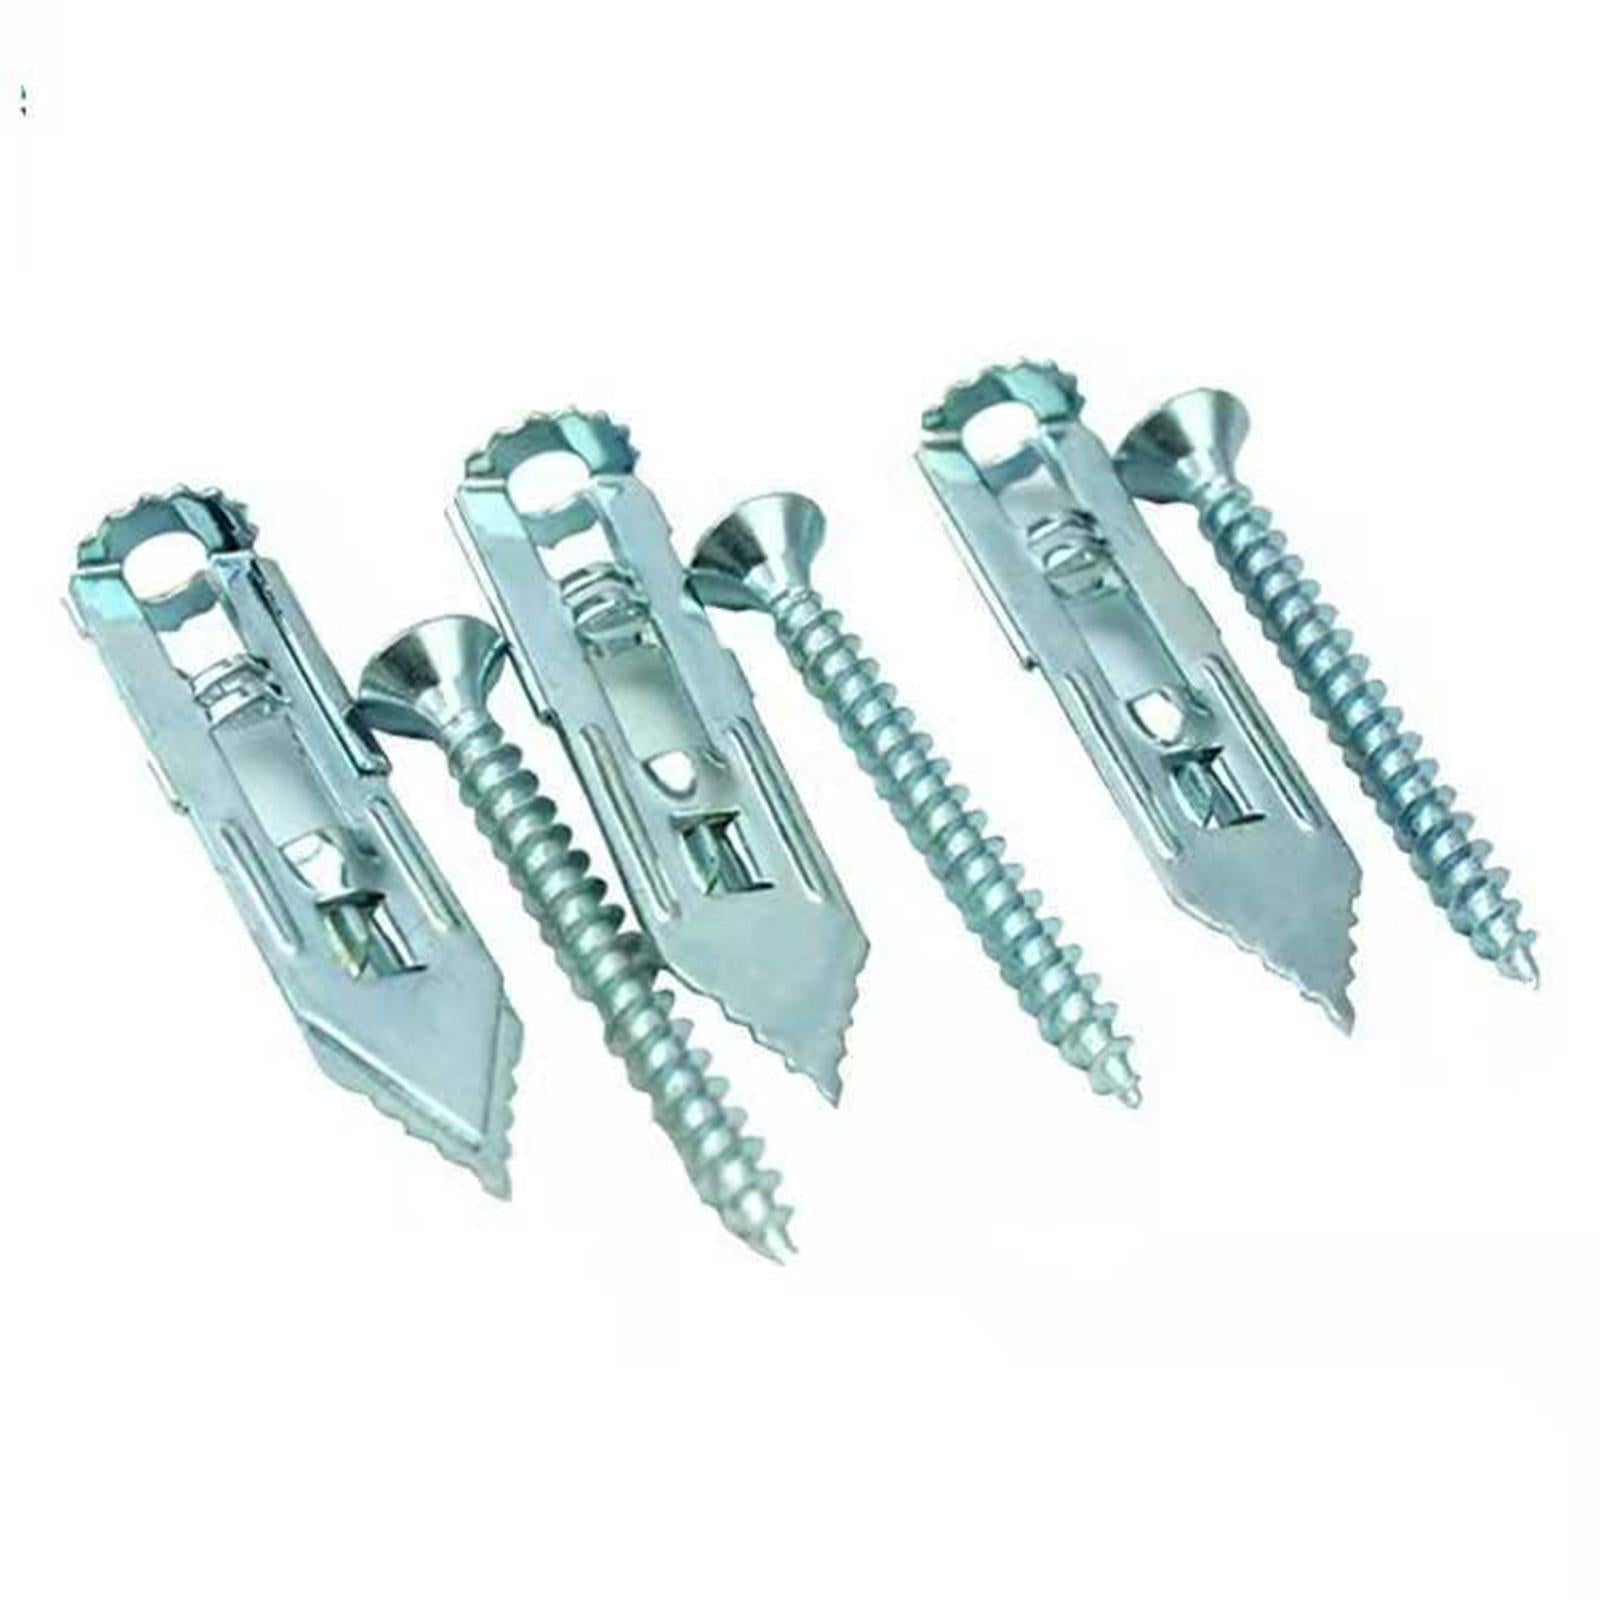 100x Drywall Self Drilling Anchors Screws Kit Easy Application for TV Bike 12x40mm Silver